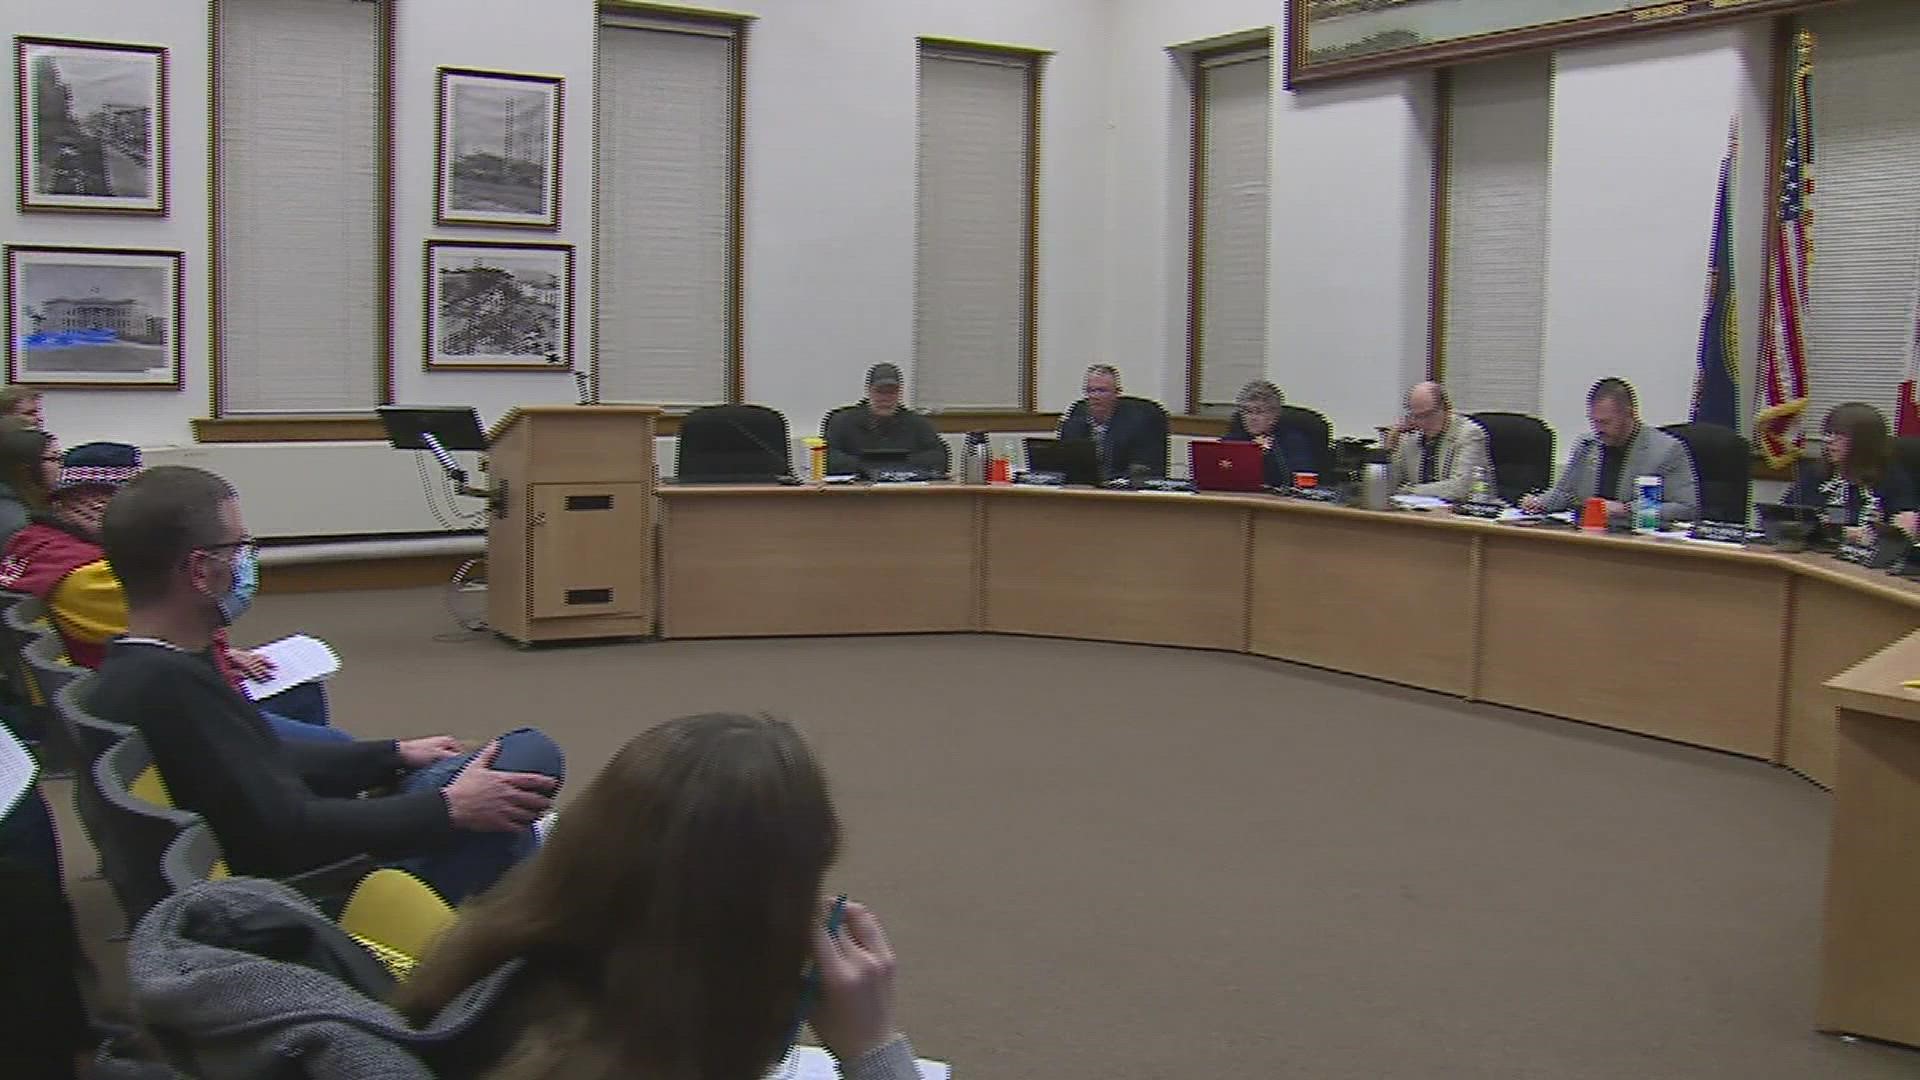 Council members passed a 5-2 vote to temporarily stop enforcing the city's ban on pit bulls.